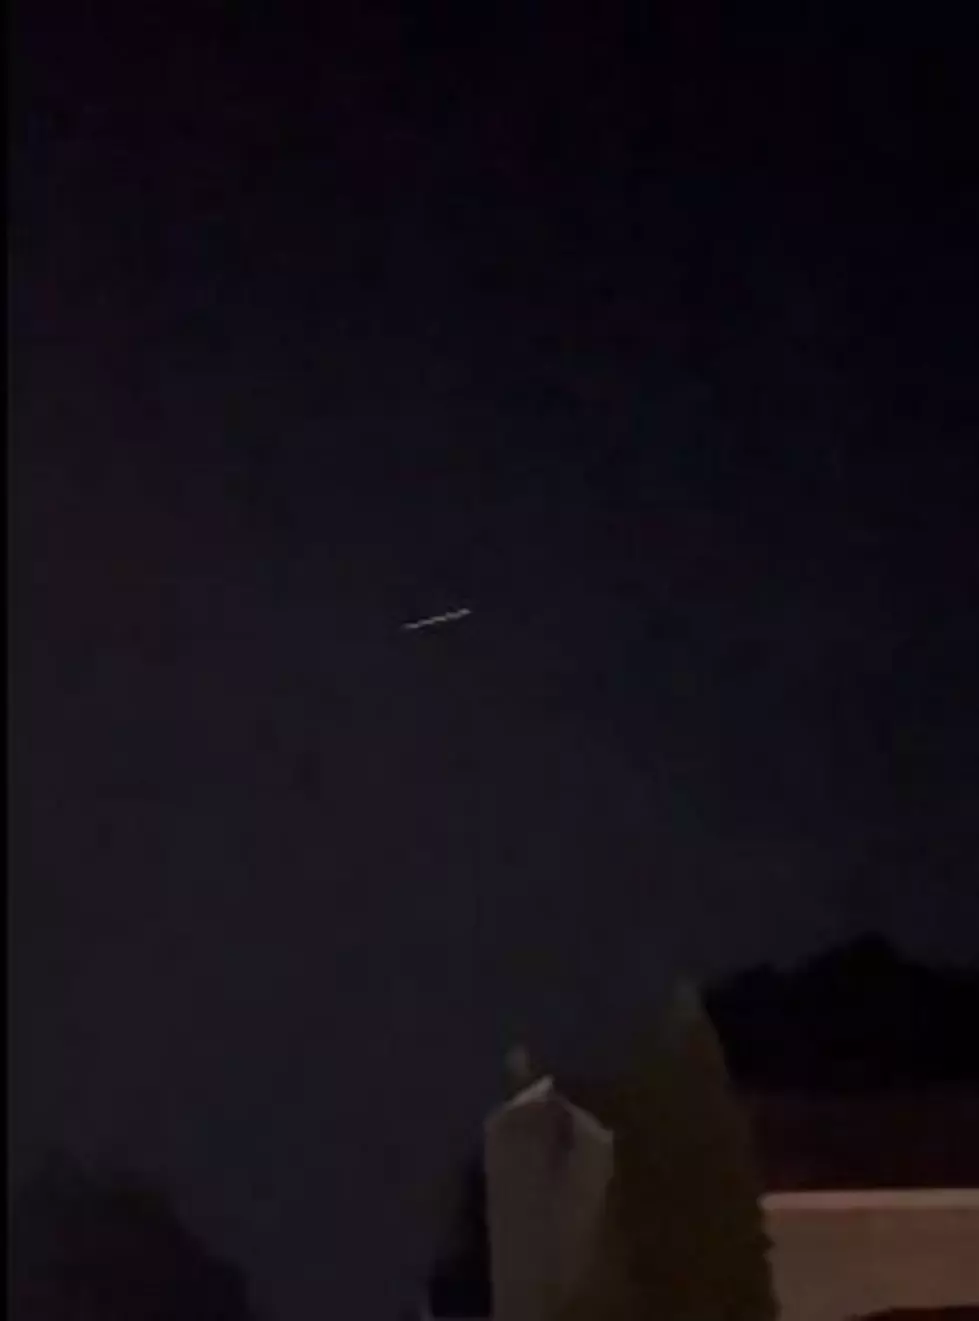 Possible UFO Spotted in Upstate New York